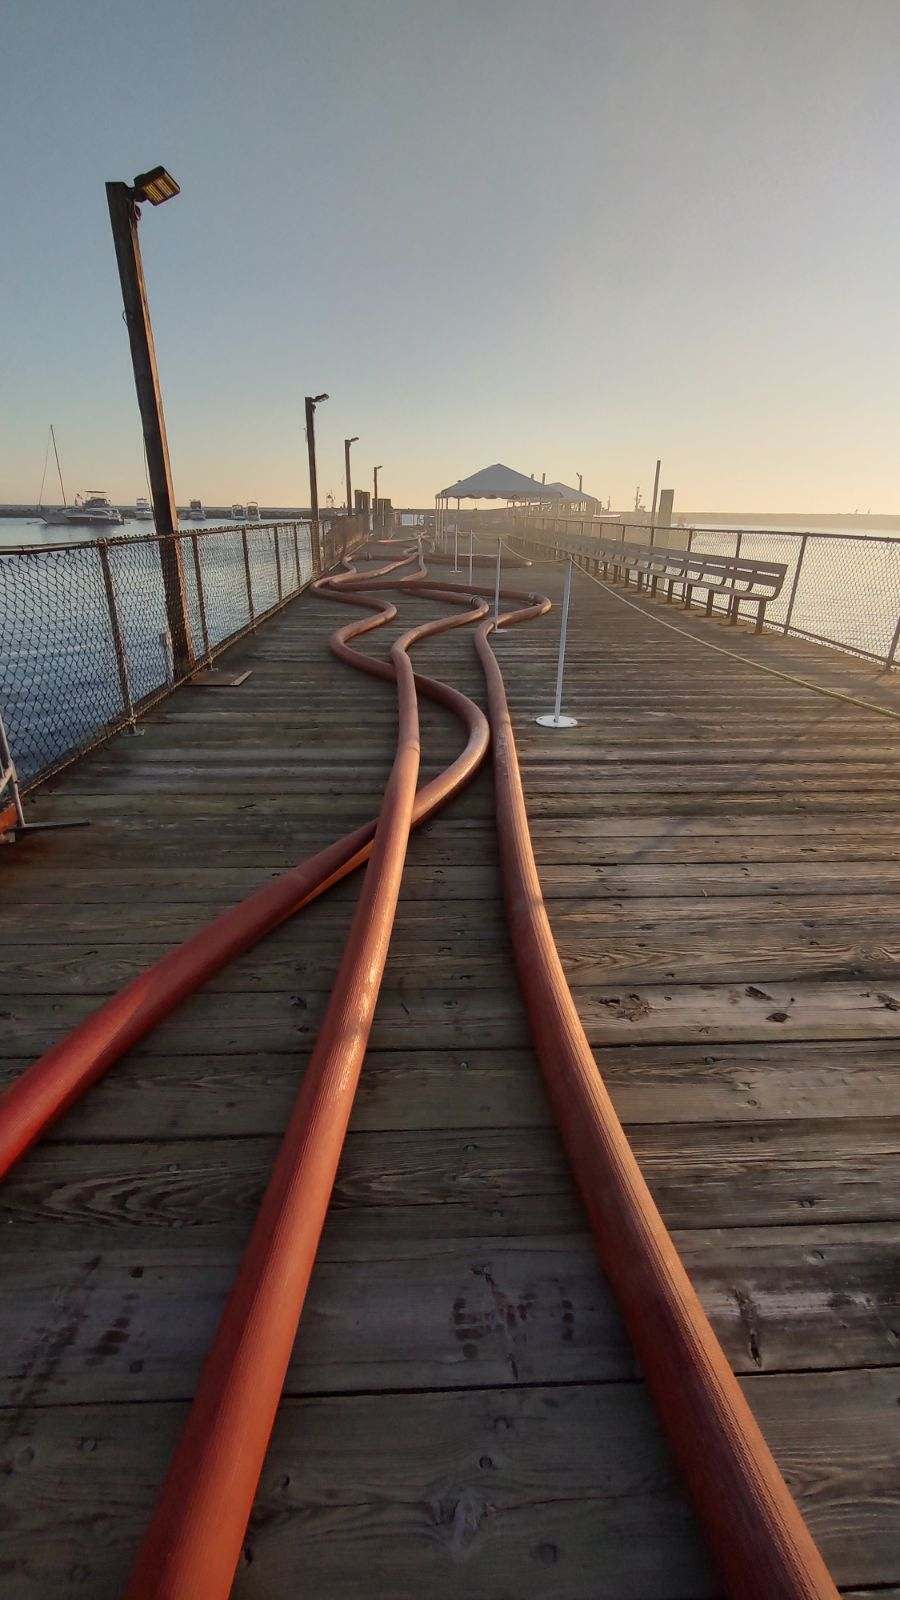 Hoses transported seawater to fight the fire after millions of gallons of freshwater had been used. Water officials feared exhausting the island's water supply and creating a "secondary crisis."